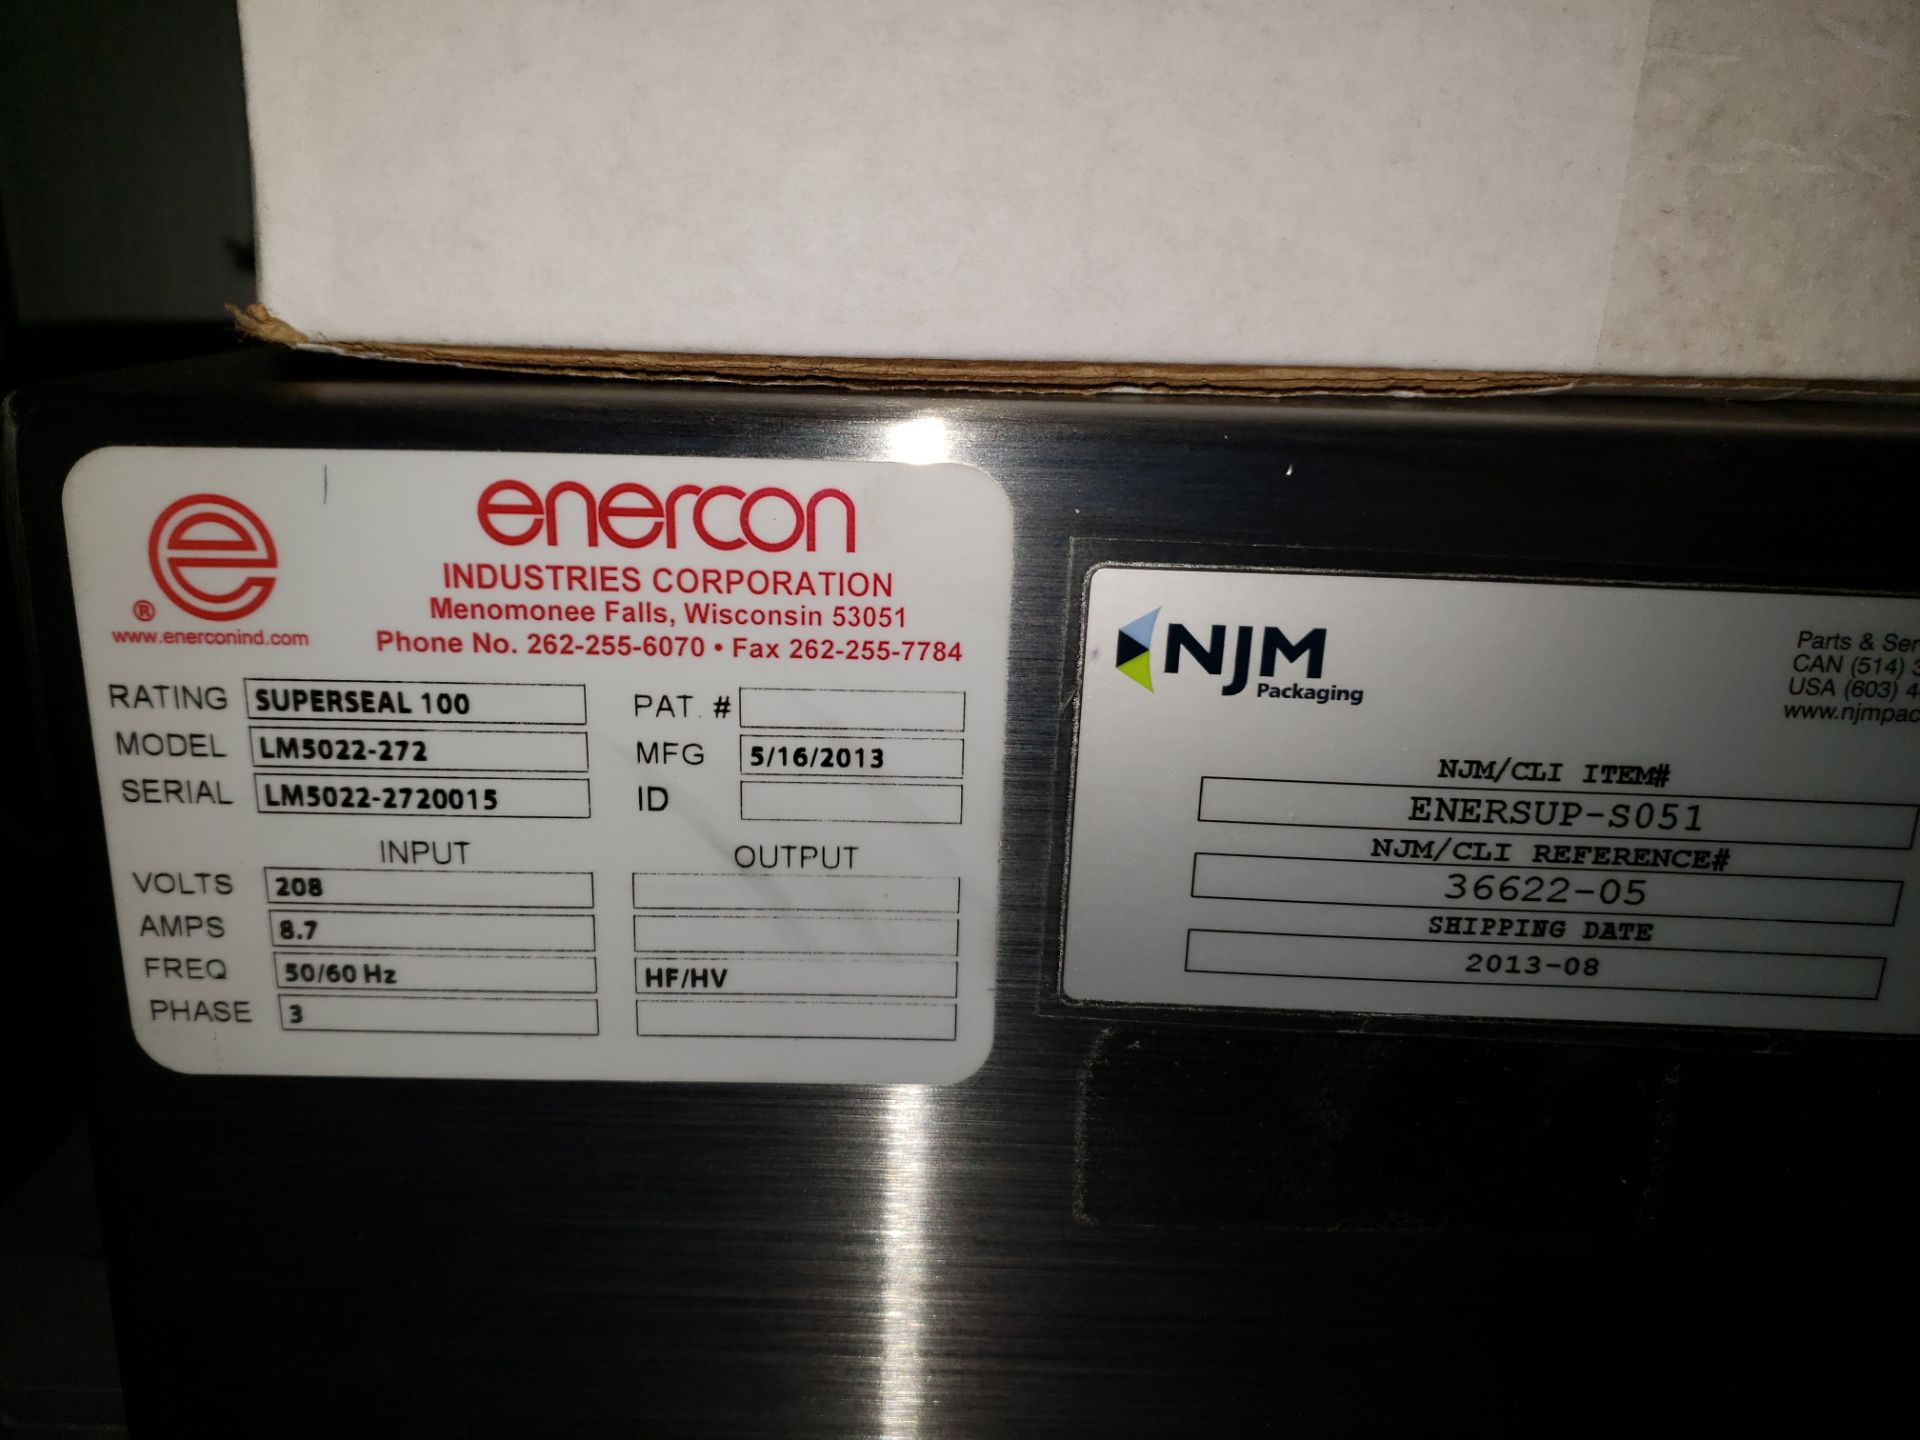 ENERCON SUPERSEAL 100 INDUCTION SEALER, MODEL LM5022-272, 208 VOLTS - Image 4 of 8